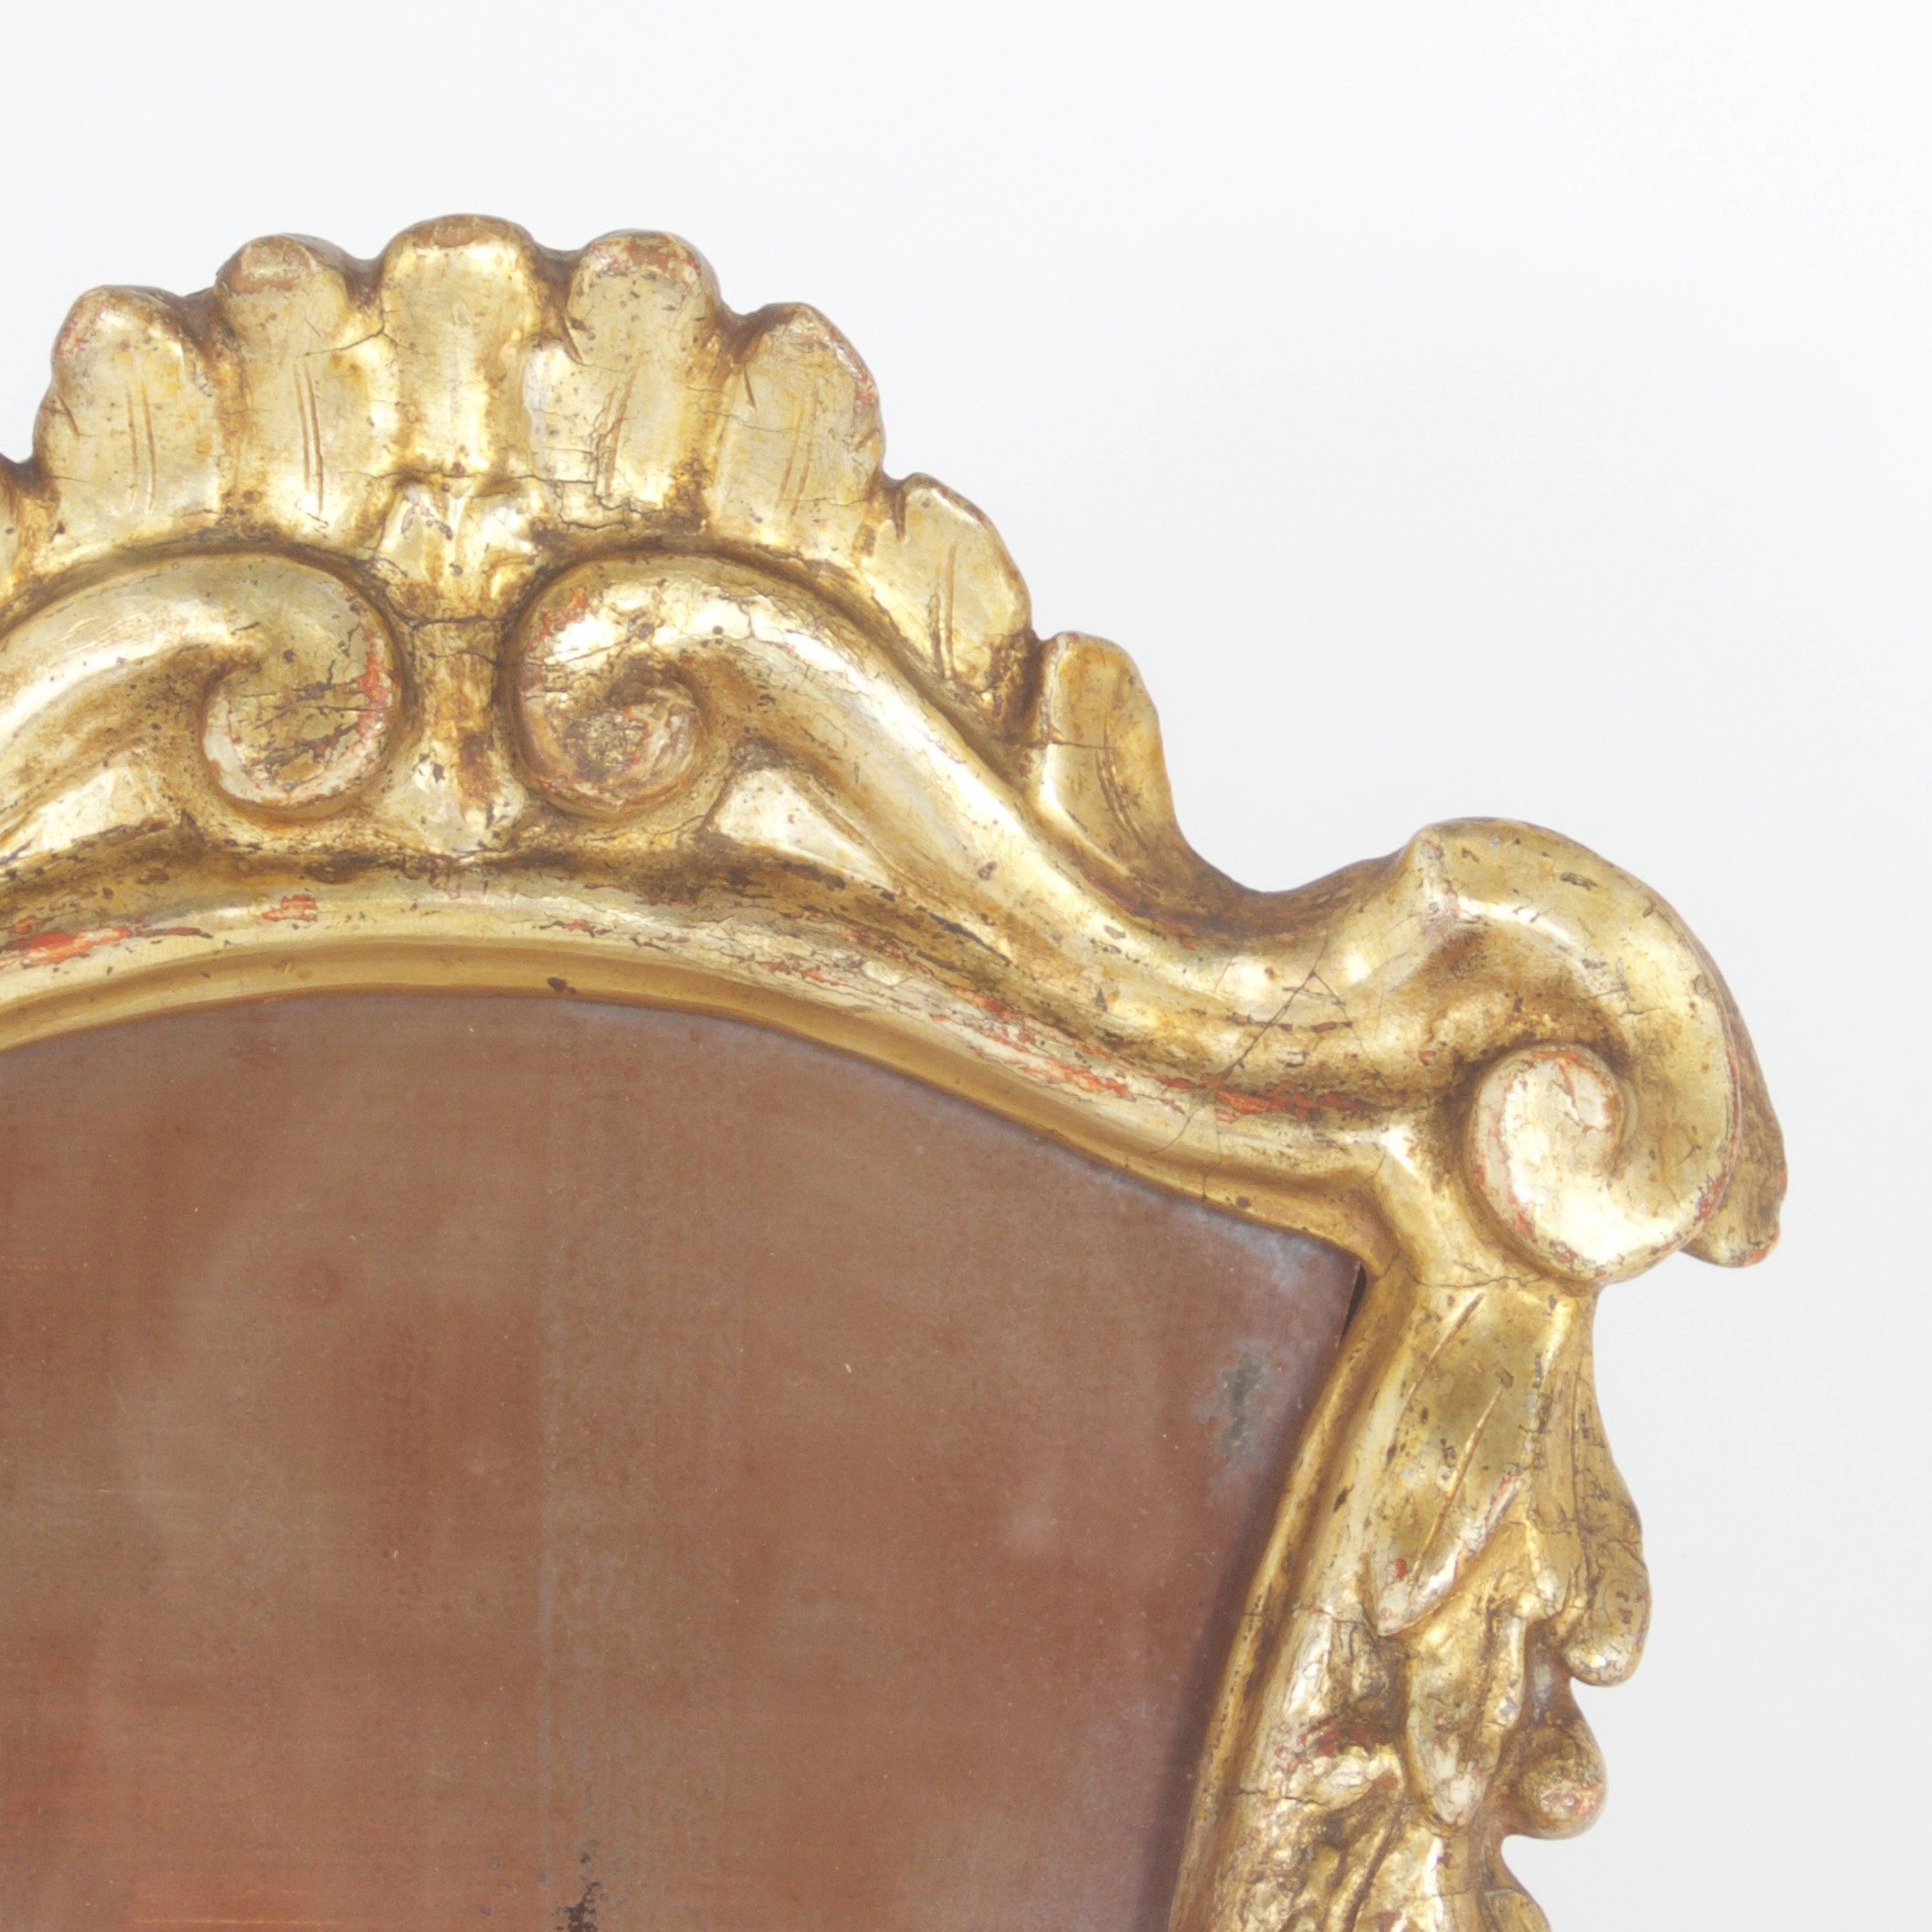 Charming Antique Italian carved and gilt frame presented on a wood easel, with a mirror so distressed, we are calling it a frame only!  The frame is carved wood, gessoed and gilded with a now time worn Old World patina. Could be hung on a wall or